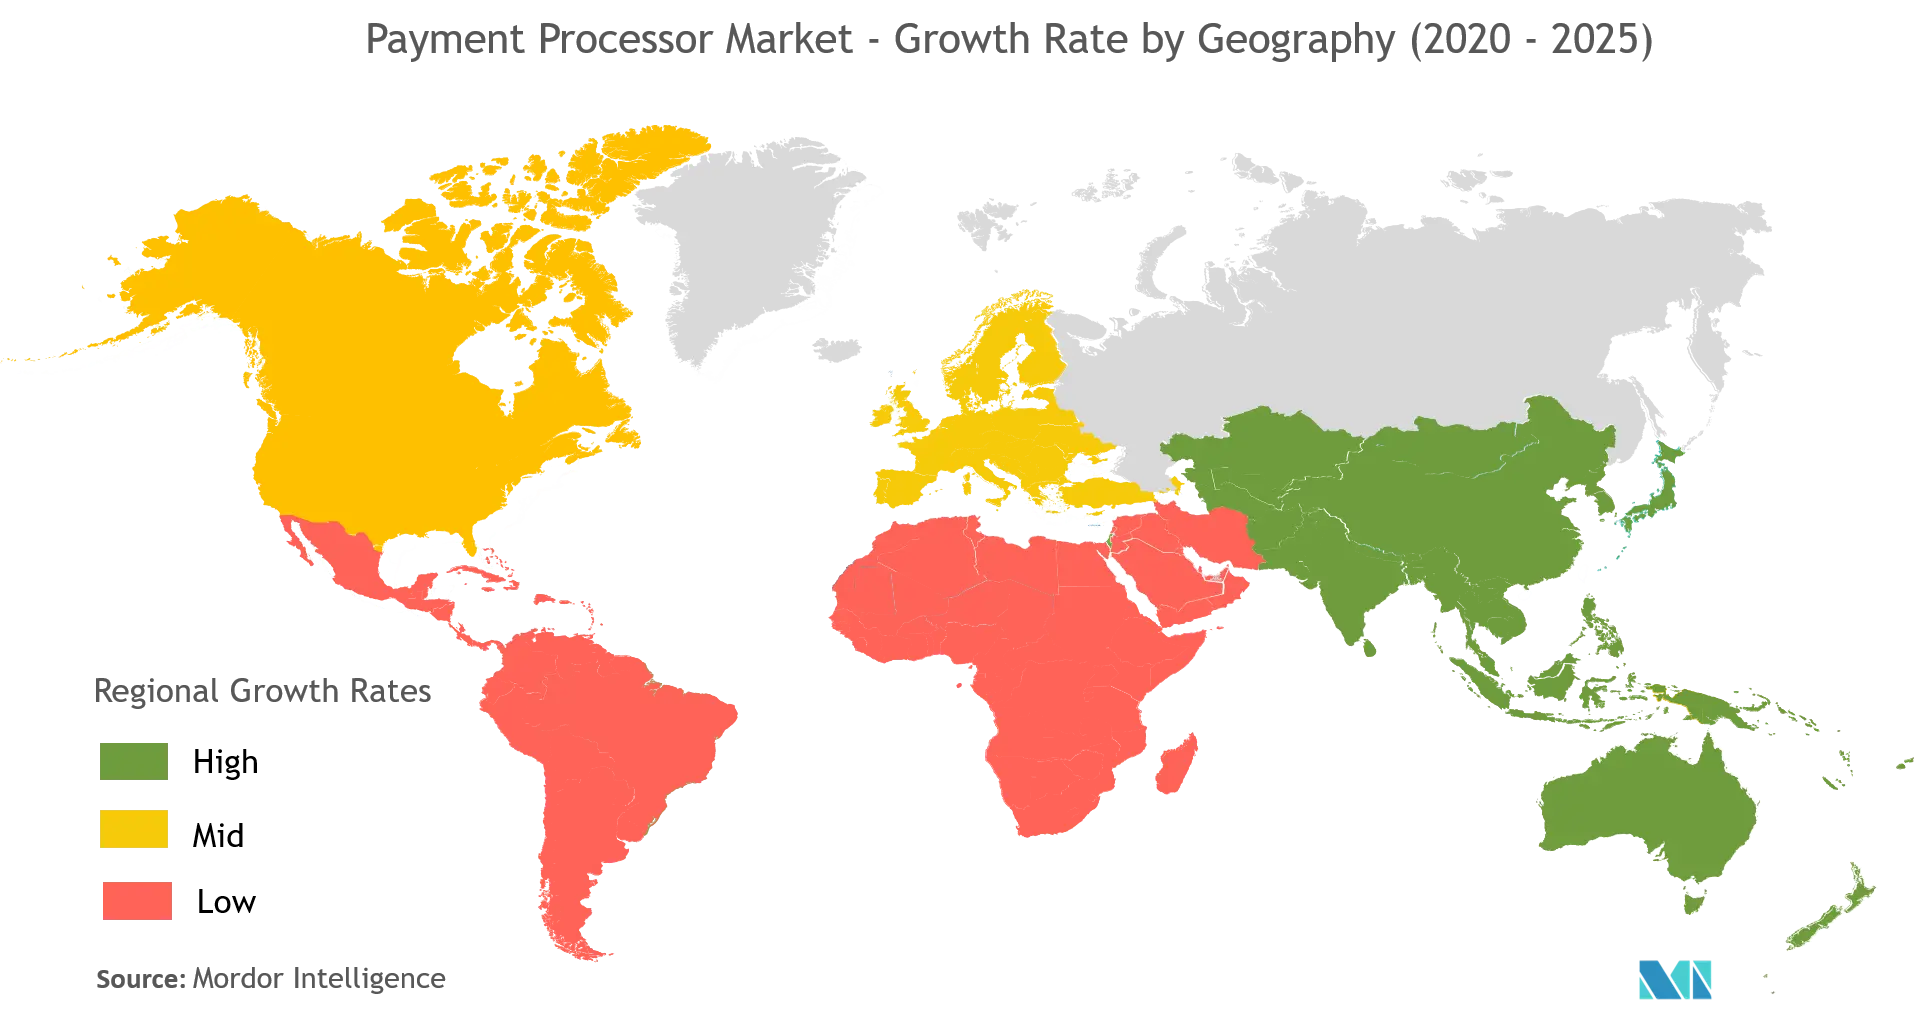 Payment Processor Market Growth